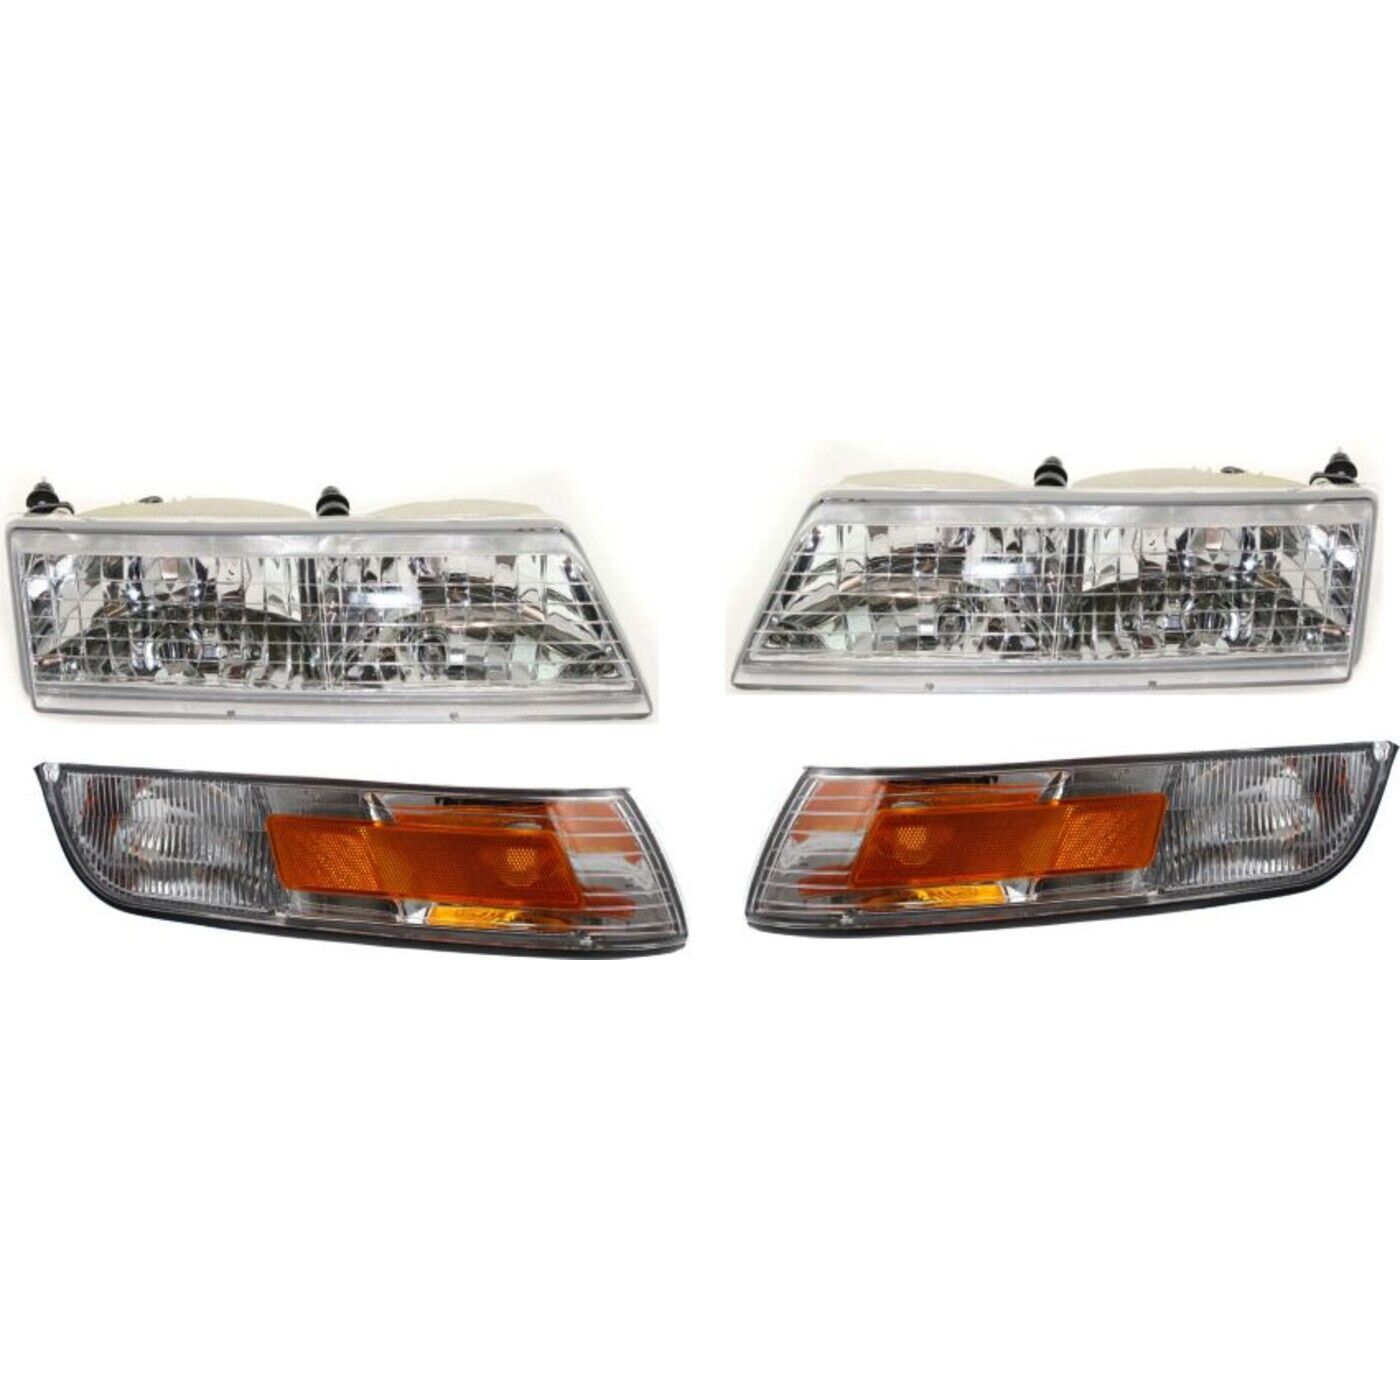 Headlight Kit For 95-97 Mercury Grand Marquis Left and Right With Corner Lights